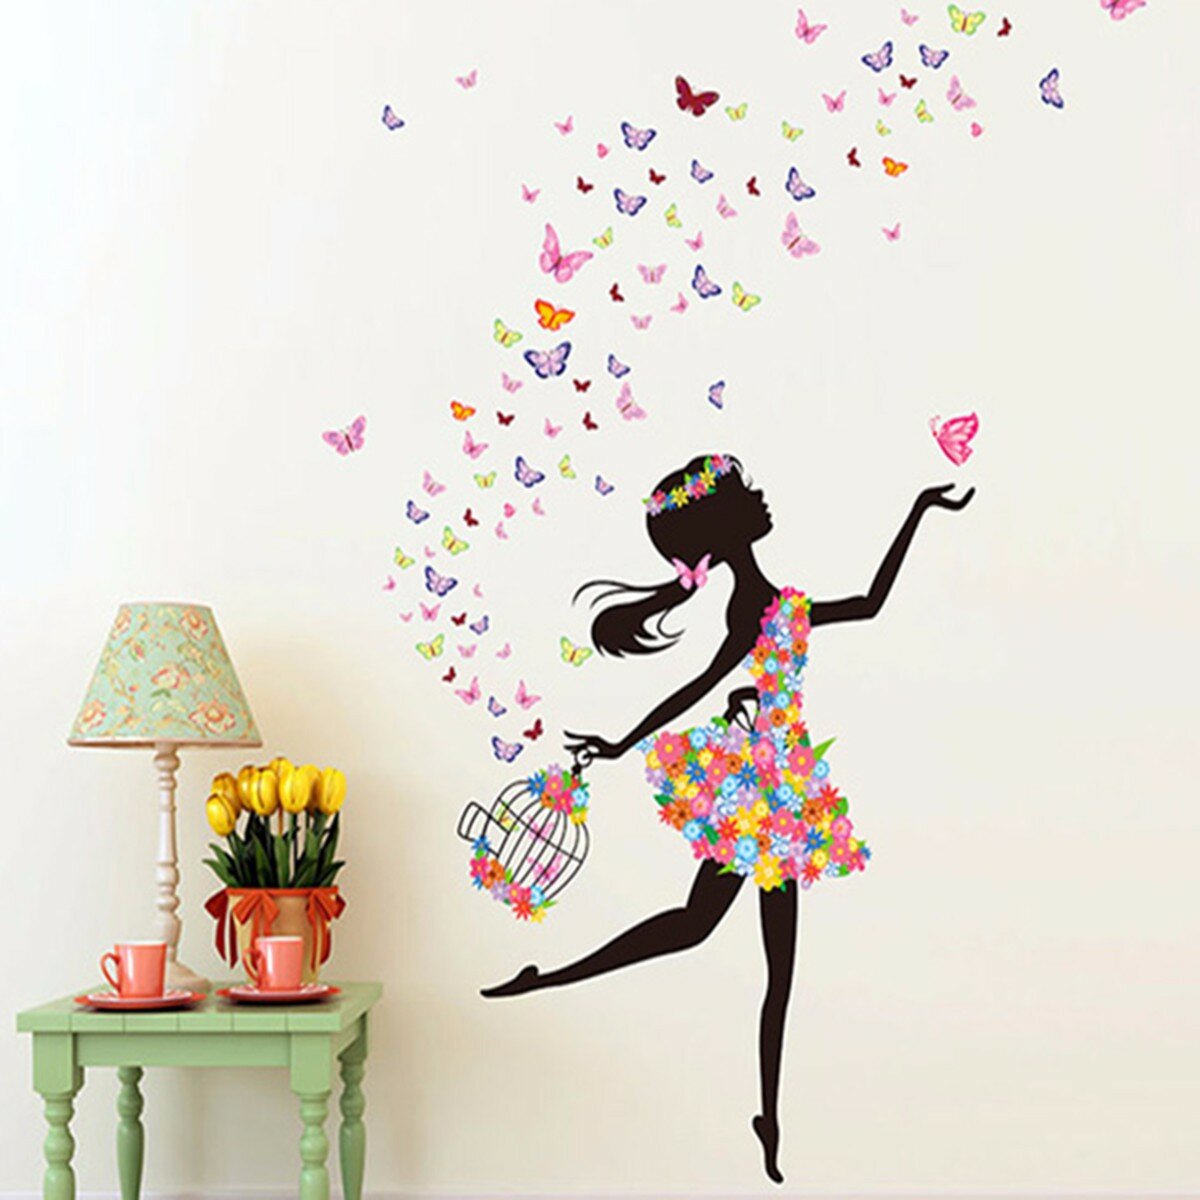 DIY Wall Stickers Flower Elf Dance Girl Butterfly Wallpaper Wall Decal Home Office Living Room Childrens Bedroom Wall De, Banggood  - buy with discount